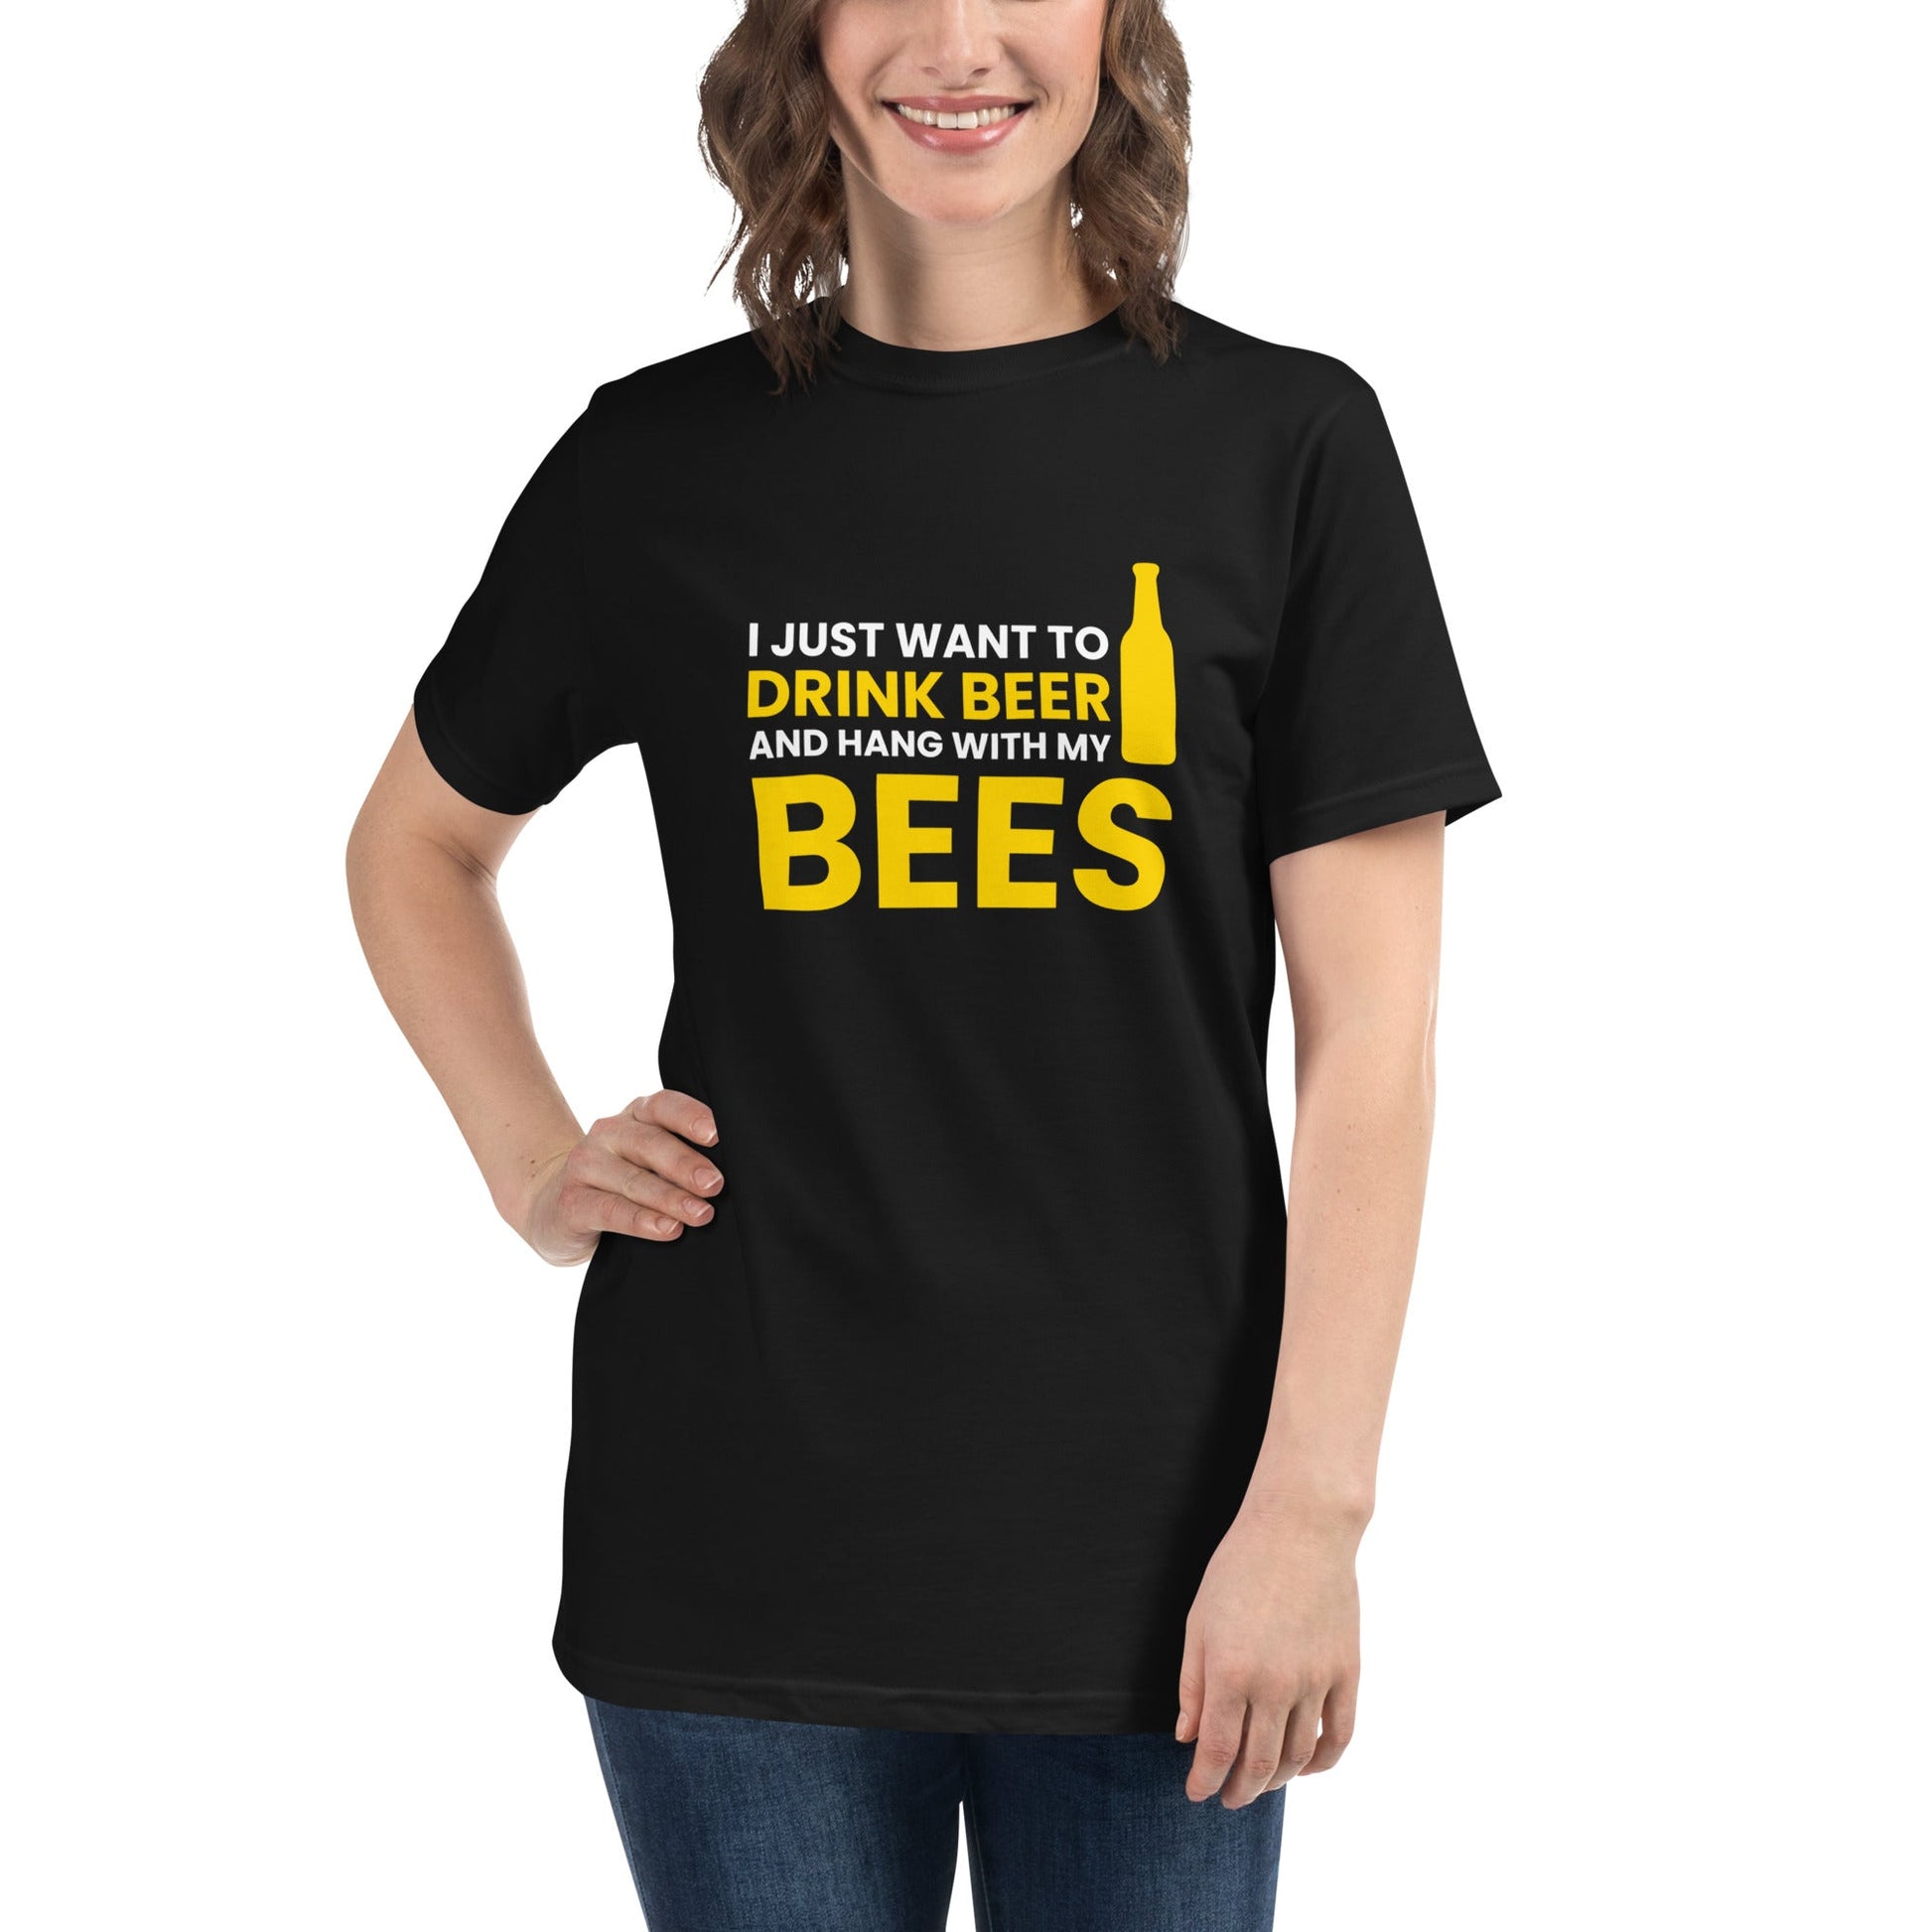 Women's Organic 'Beer and Bees' Tee: Nature-Friendly Comfort with a Fun Twist